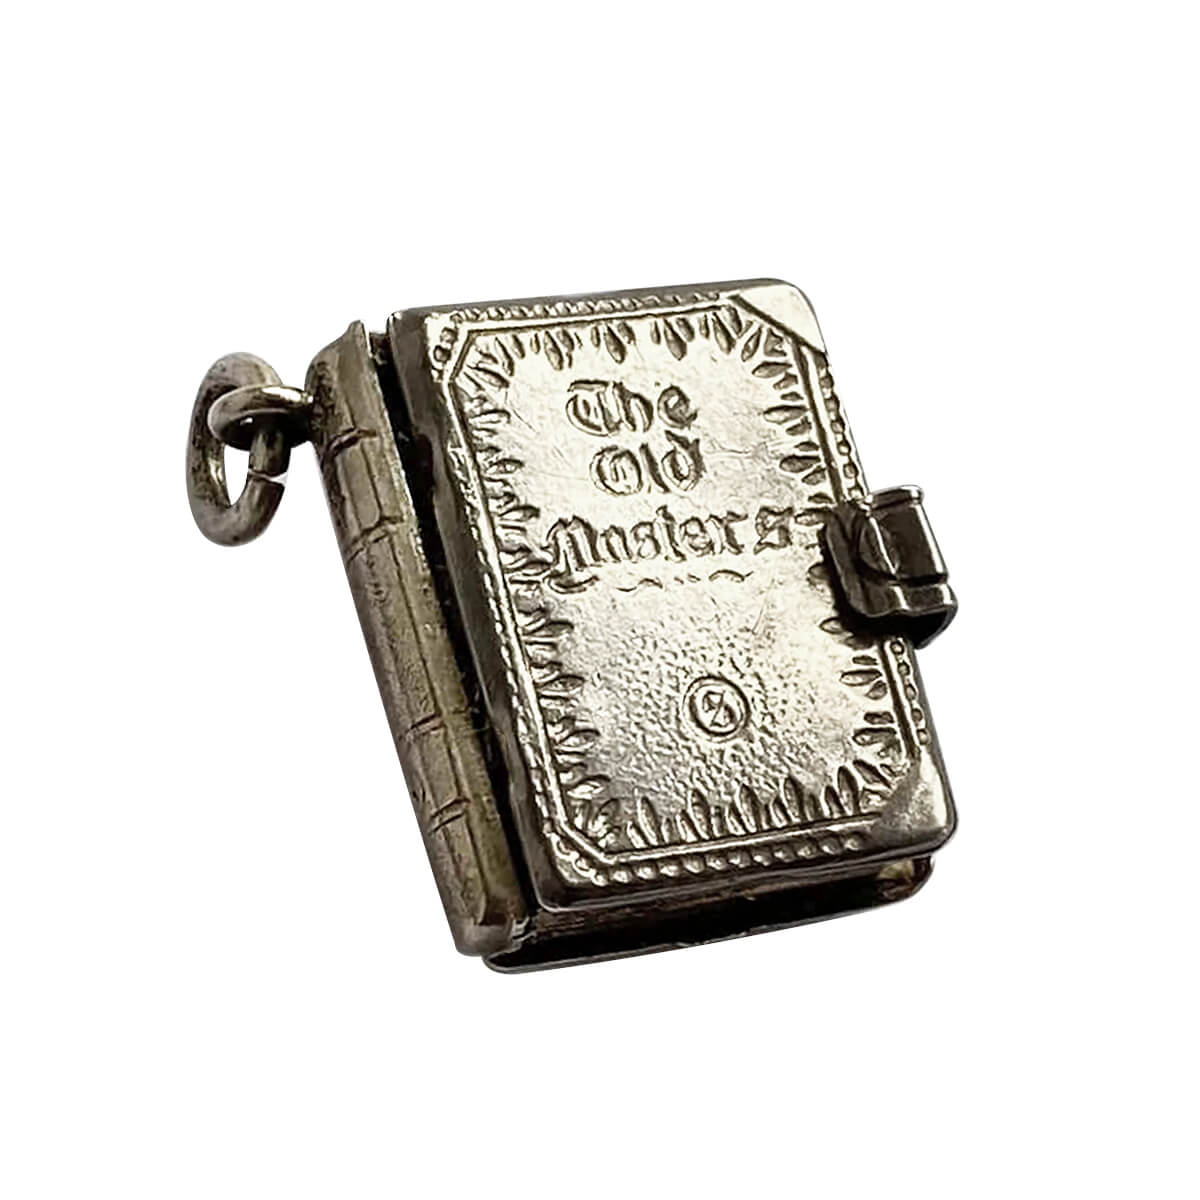 The Old Masters book charm vintage silver opens to pages of art masterpiece paintings opening pages pendant